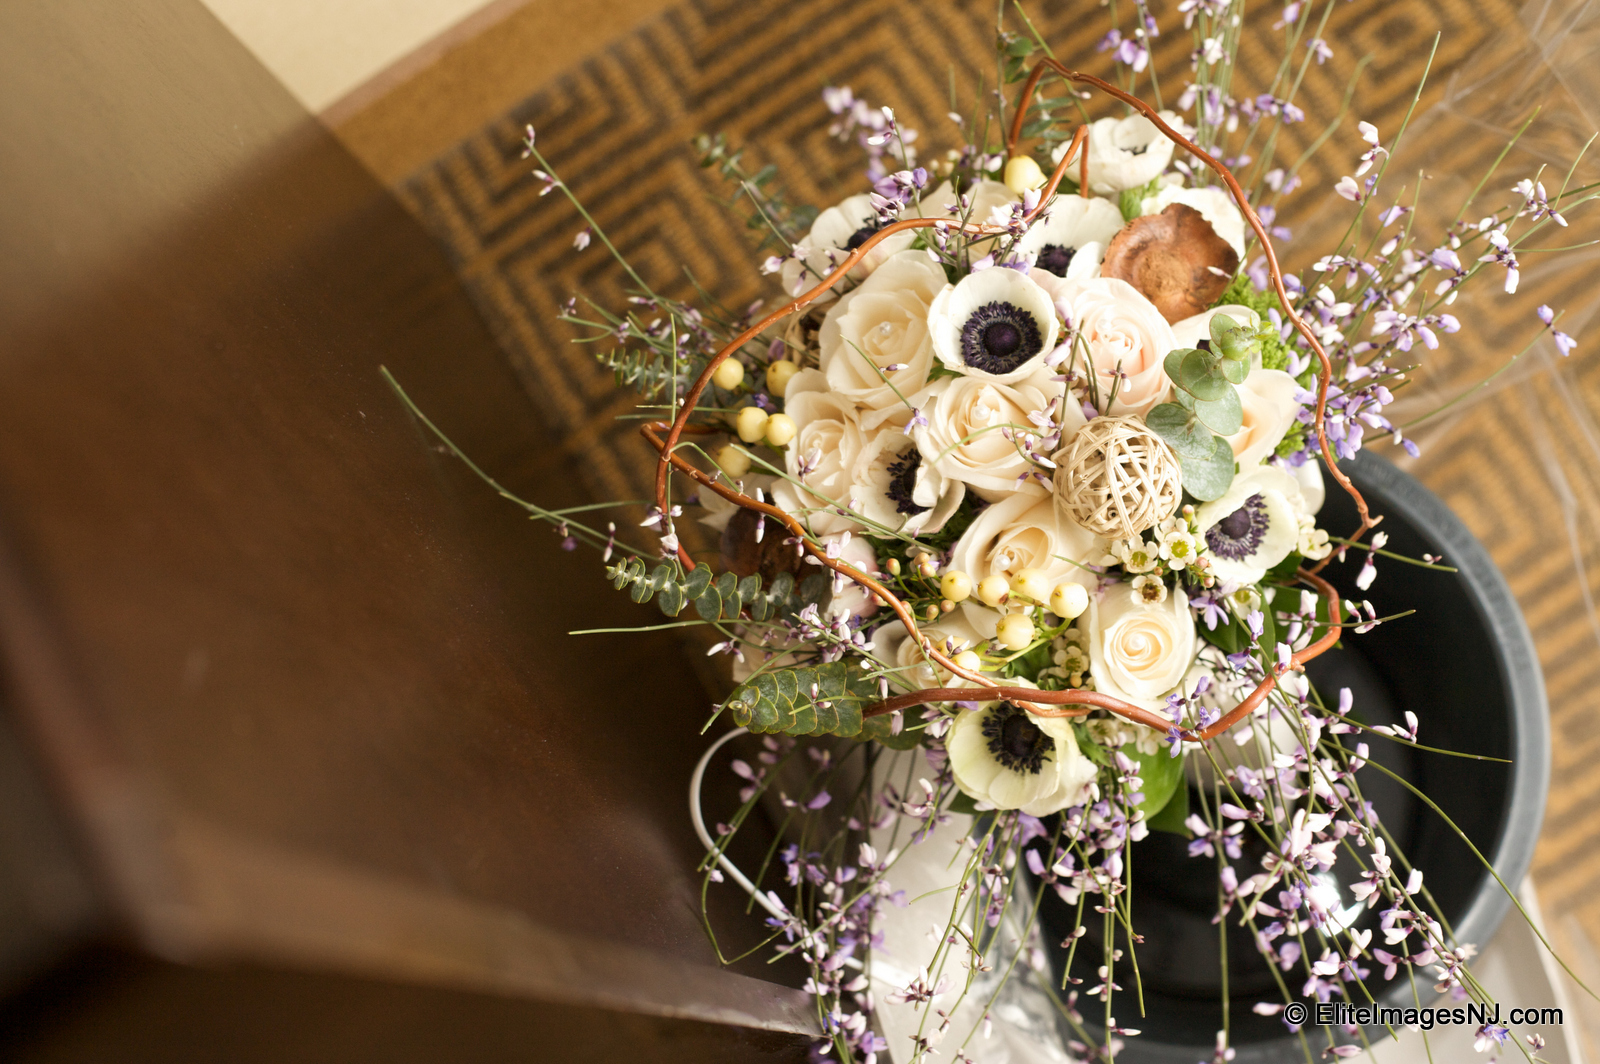 best flowers for wedding bouquets